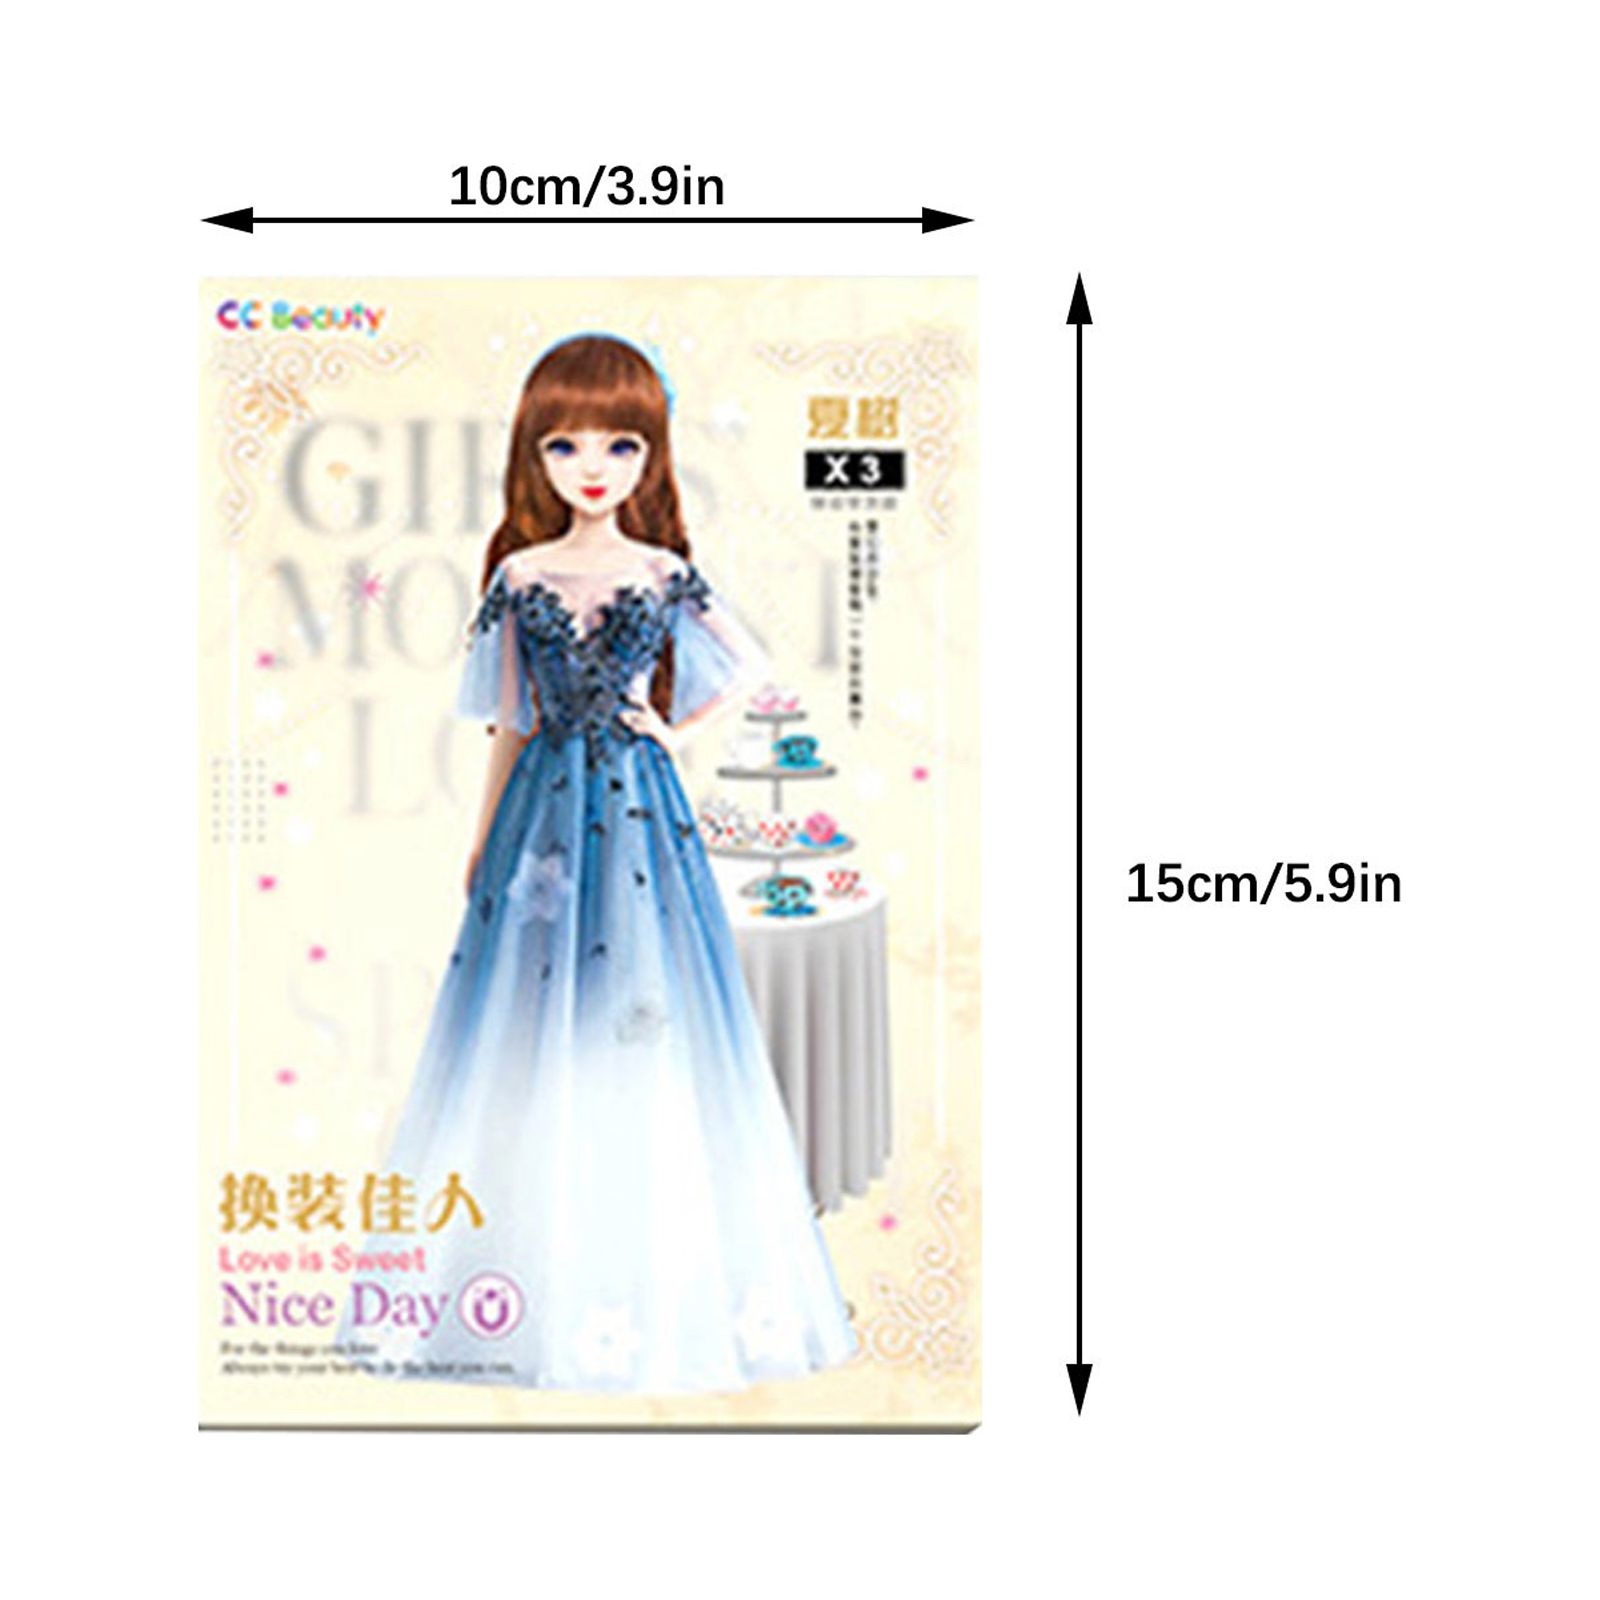 TUWABEII Games and Puzzles for Kids,Magnetic Dress Up Baby Magnetic Princess Dress Up Paper Doll Magnet Dress Up Pretend And Play Travel Playset Toy Magnetic Dress Up Dolls For Girls Kid's Gift - image 4 of 6